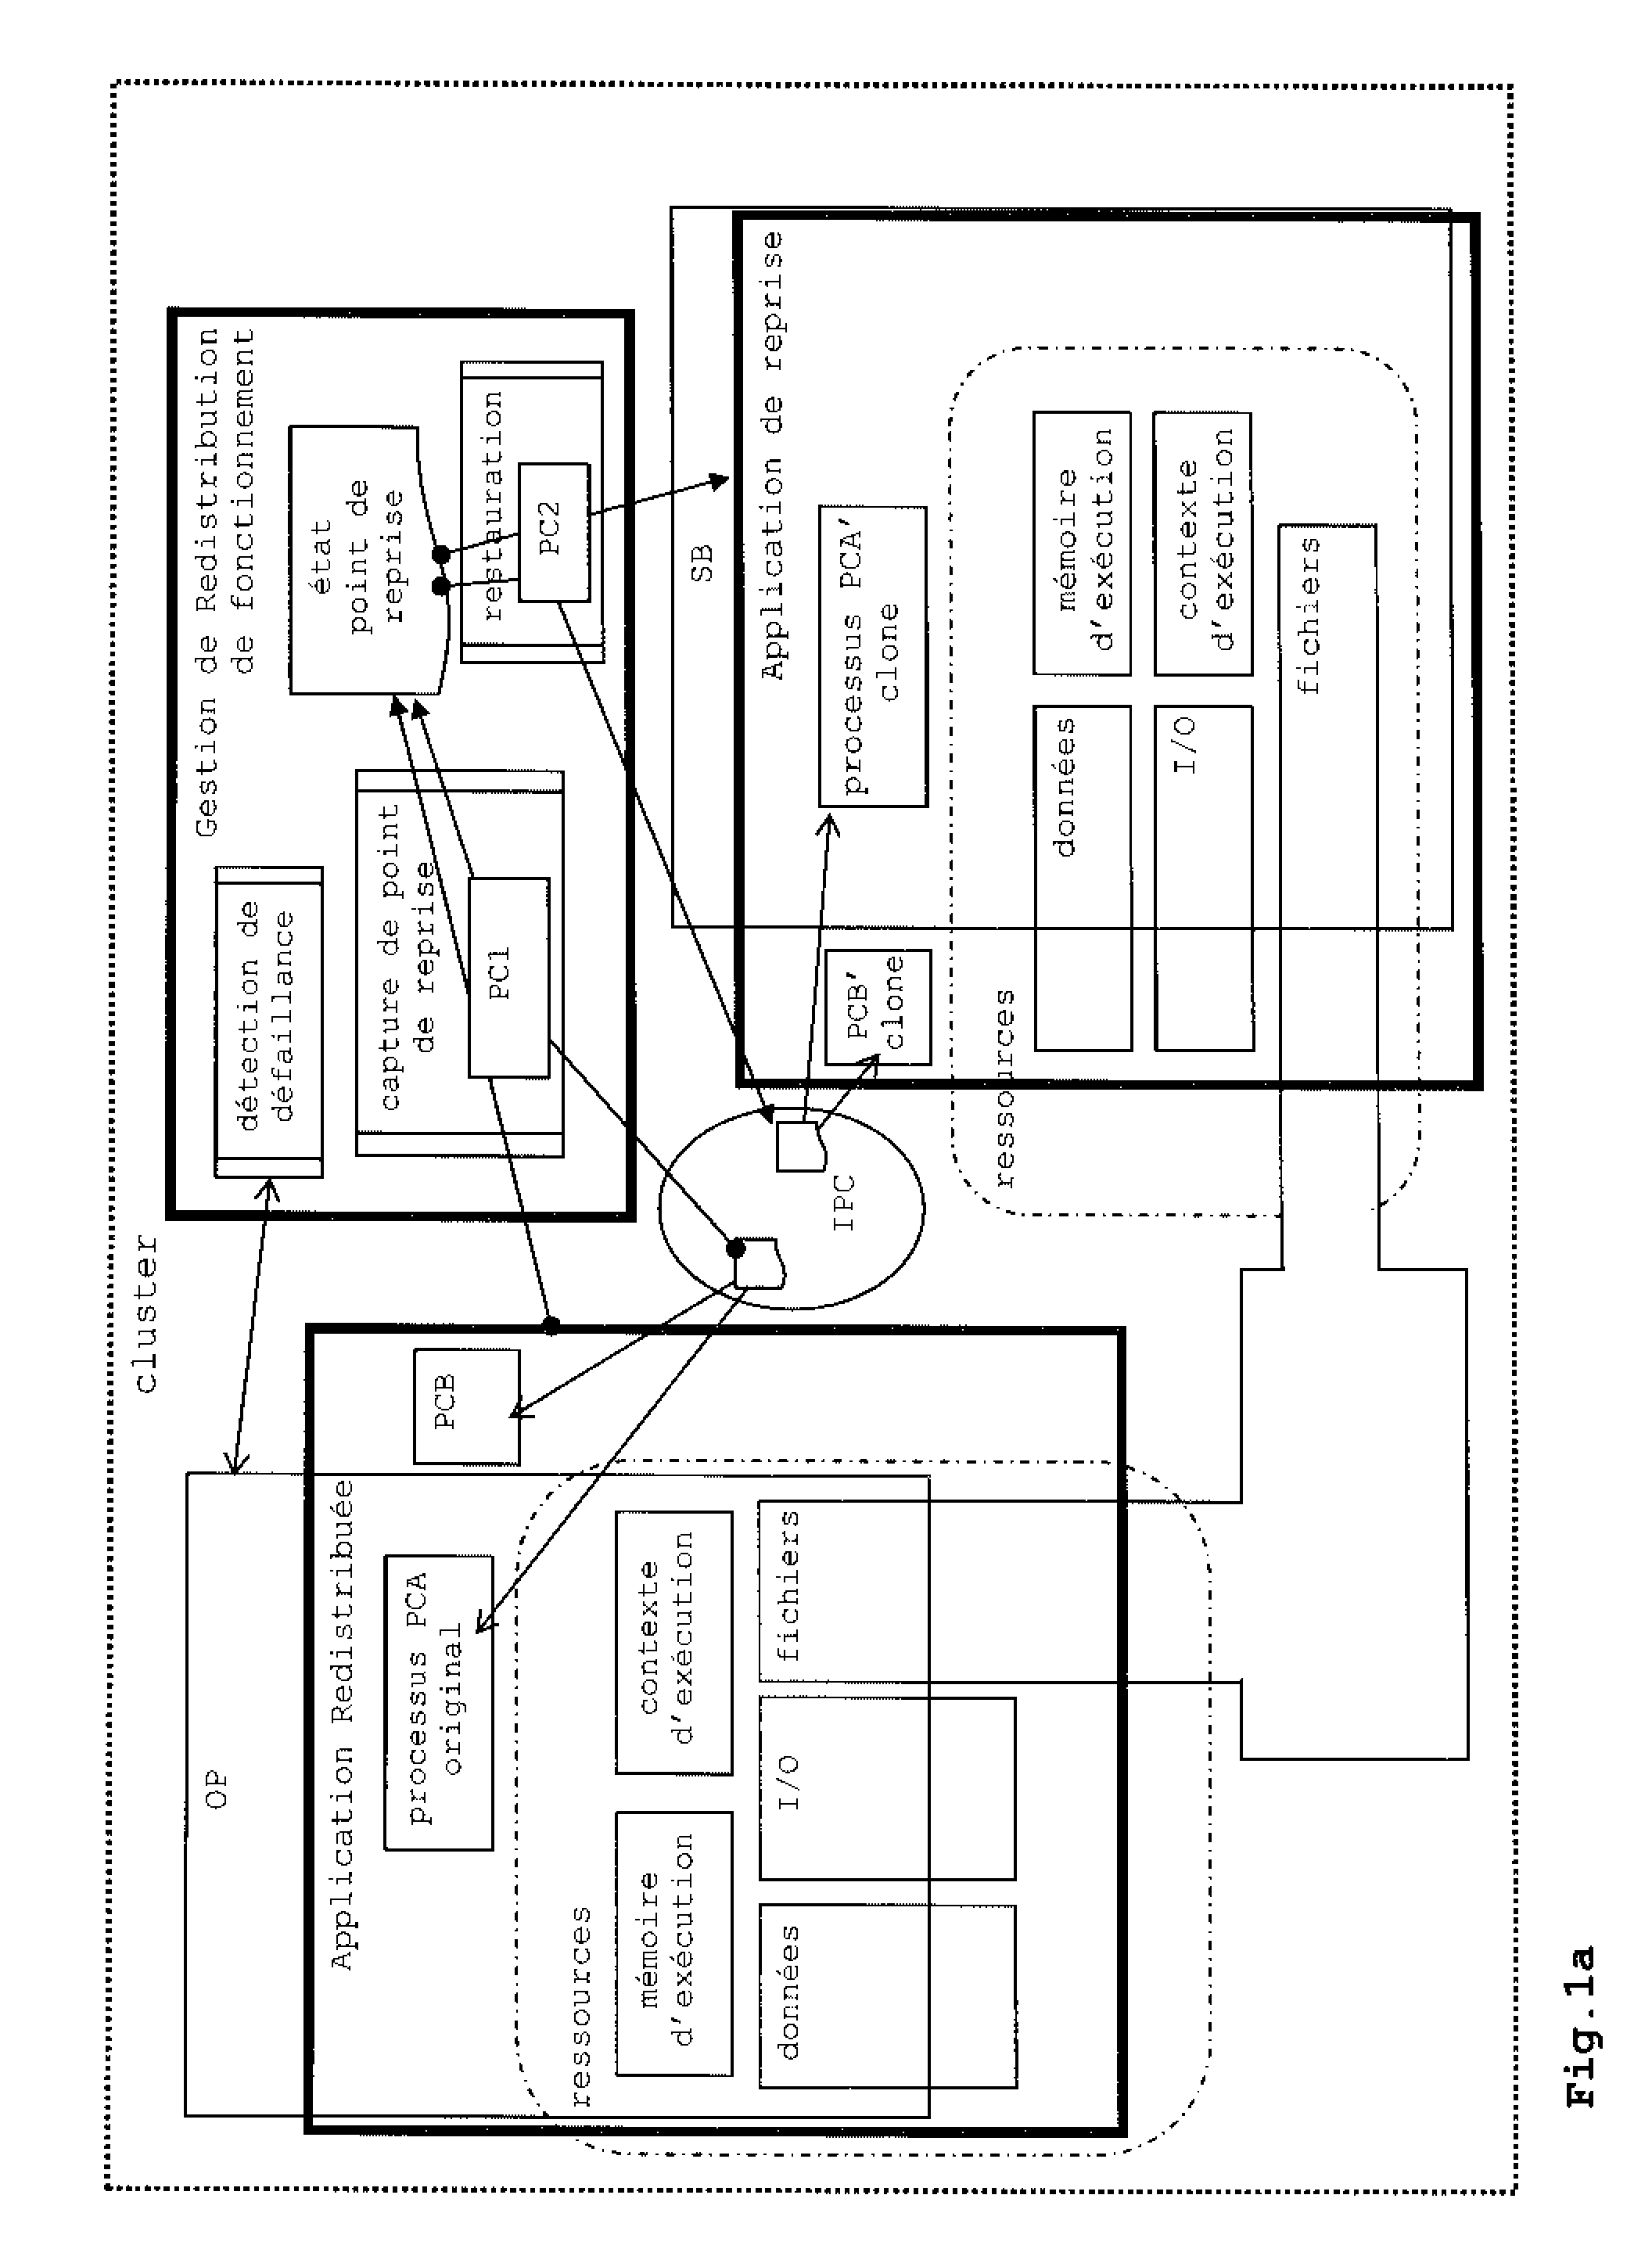 Method for Managing a Software Process, Method and System for Redistribution or for Continuity of Operation in a Multi-Computer Architecture